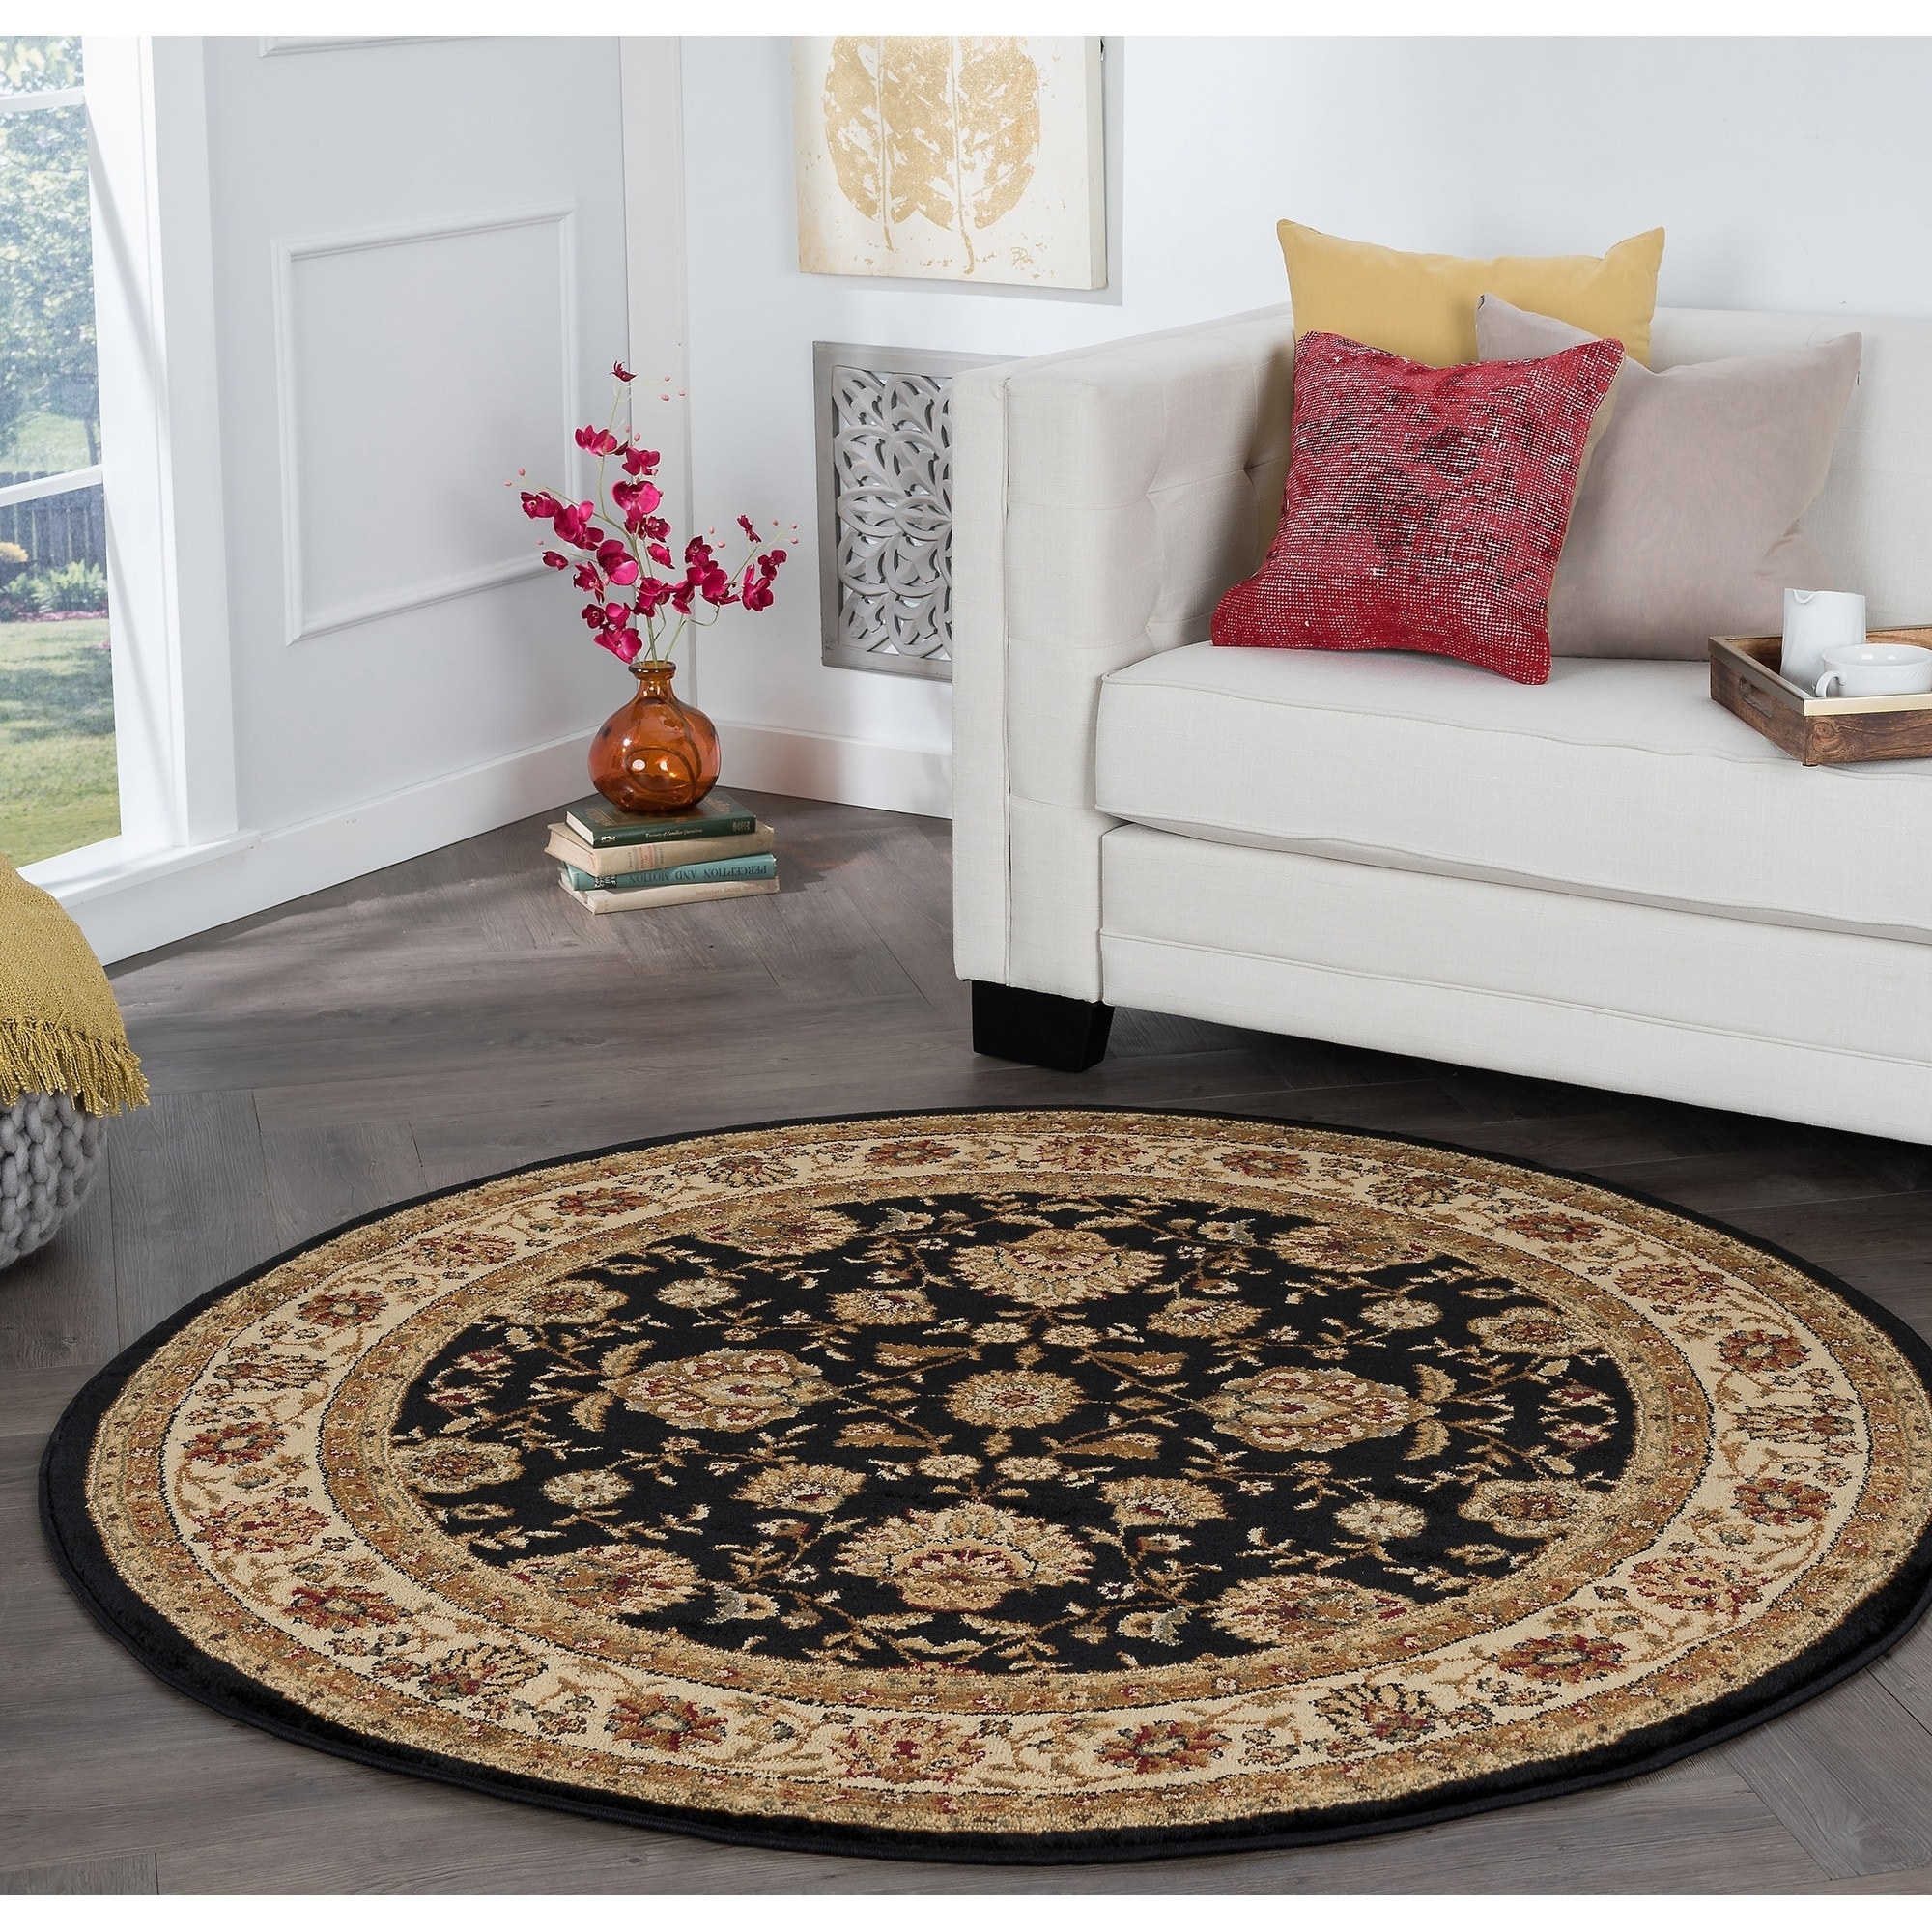 Rhythm 105143 Black Traditional Area Rug (7 10 Round) (BlackSecondary Colors Beige, red, greenShape RoundTip We recommend the use of a non skid pad to keep the rug in place on smooth surfaces.All rug sizes are approximate. Due to the difference of moni